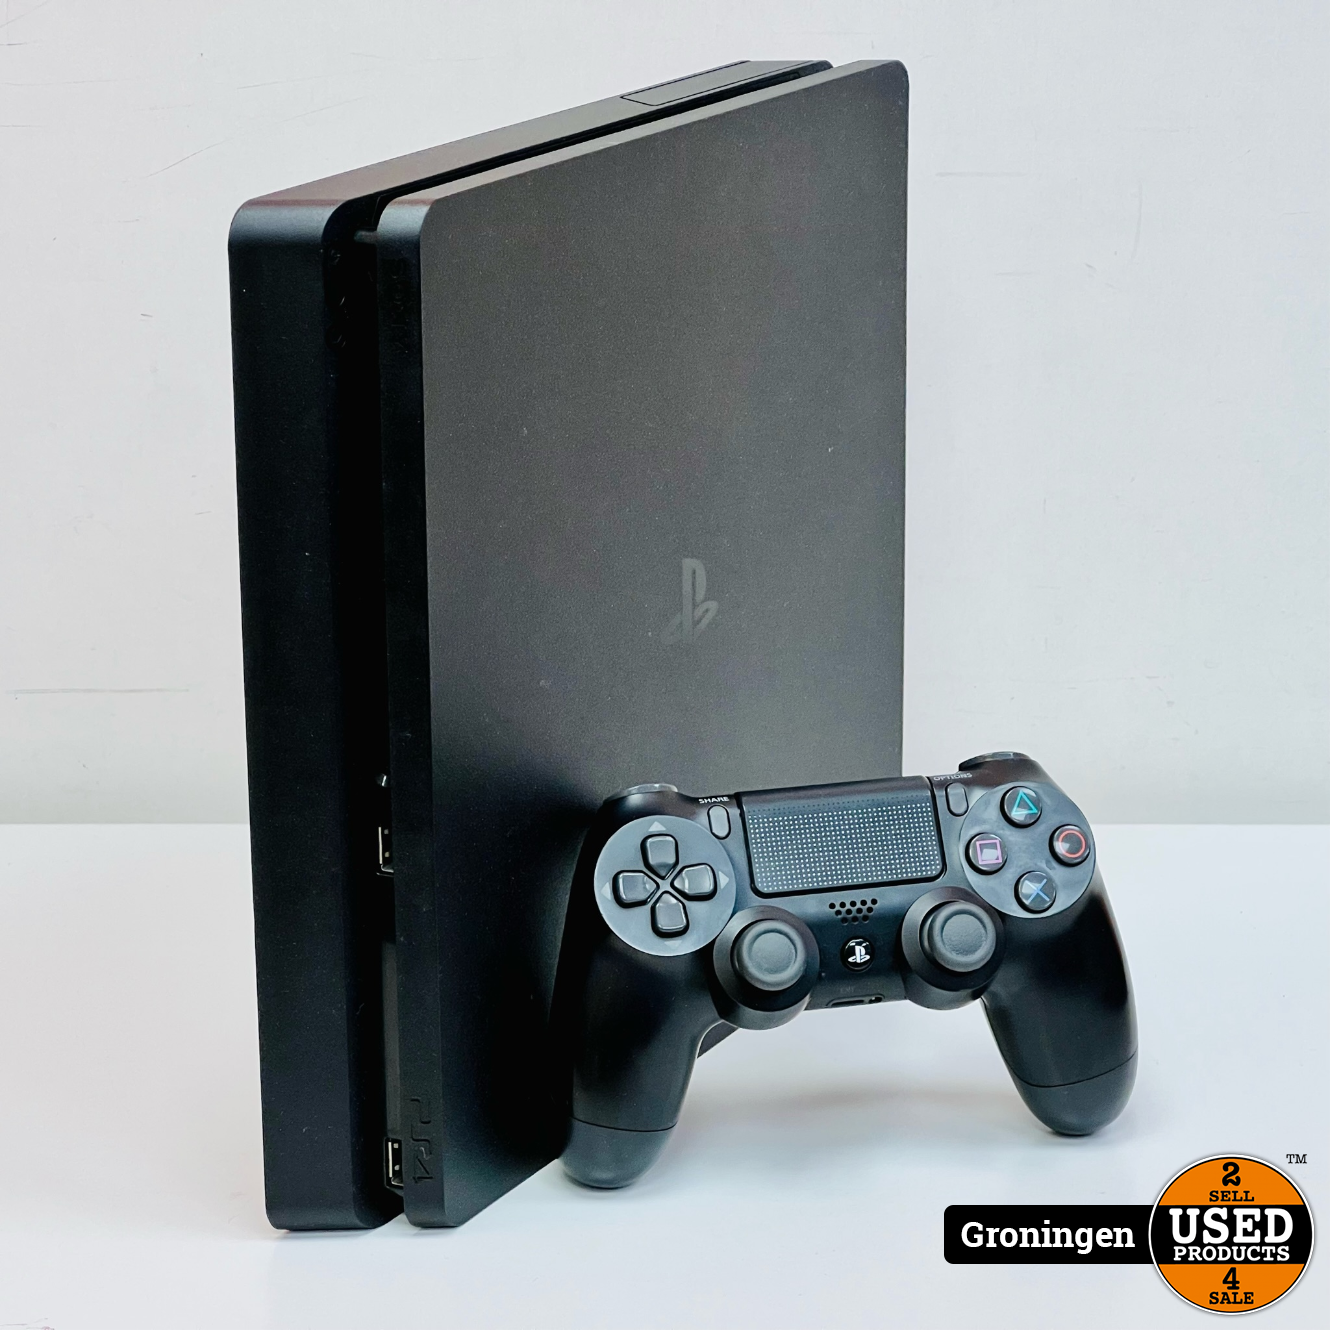 PS4] Sony PlayStation 4 Slim 1TB Zwart | incl. Sony Dualshock Controller kabels - Used Products Groningen